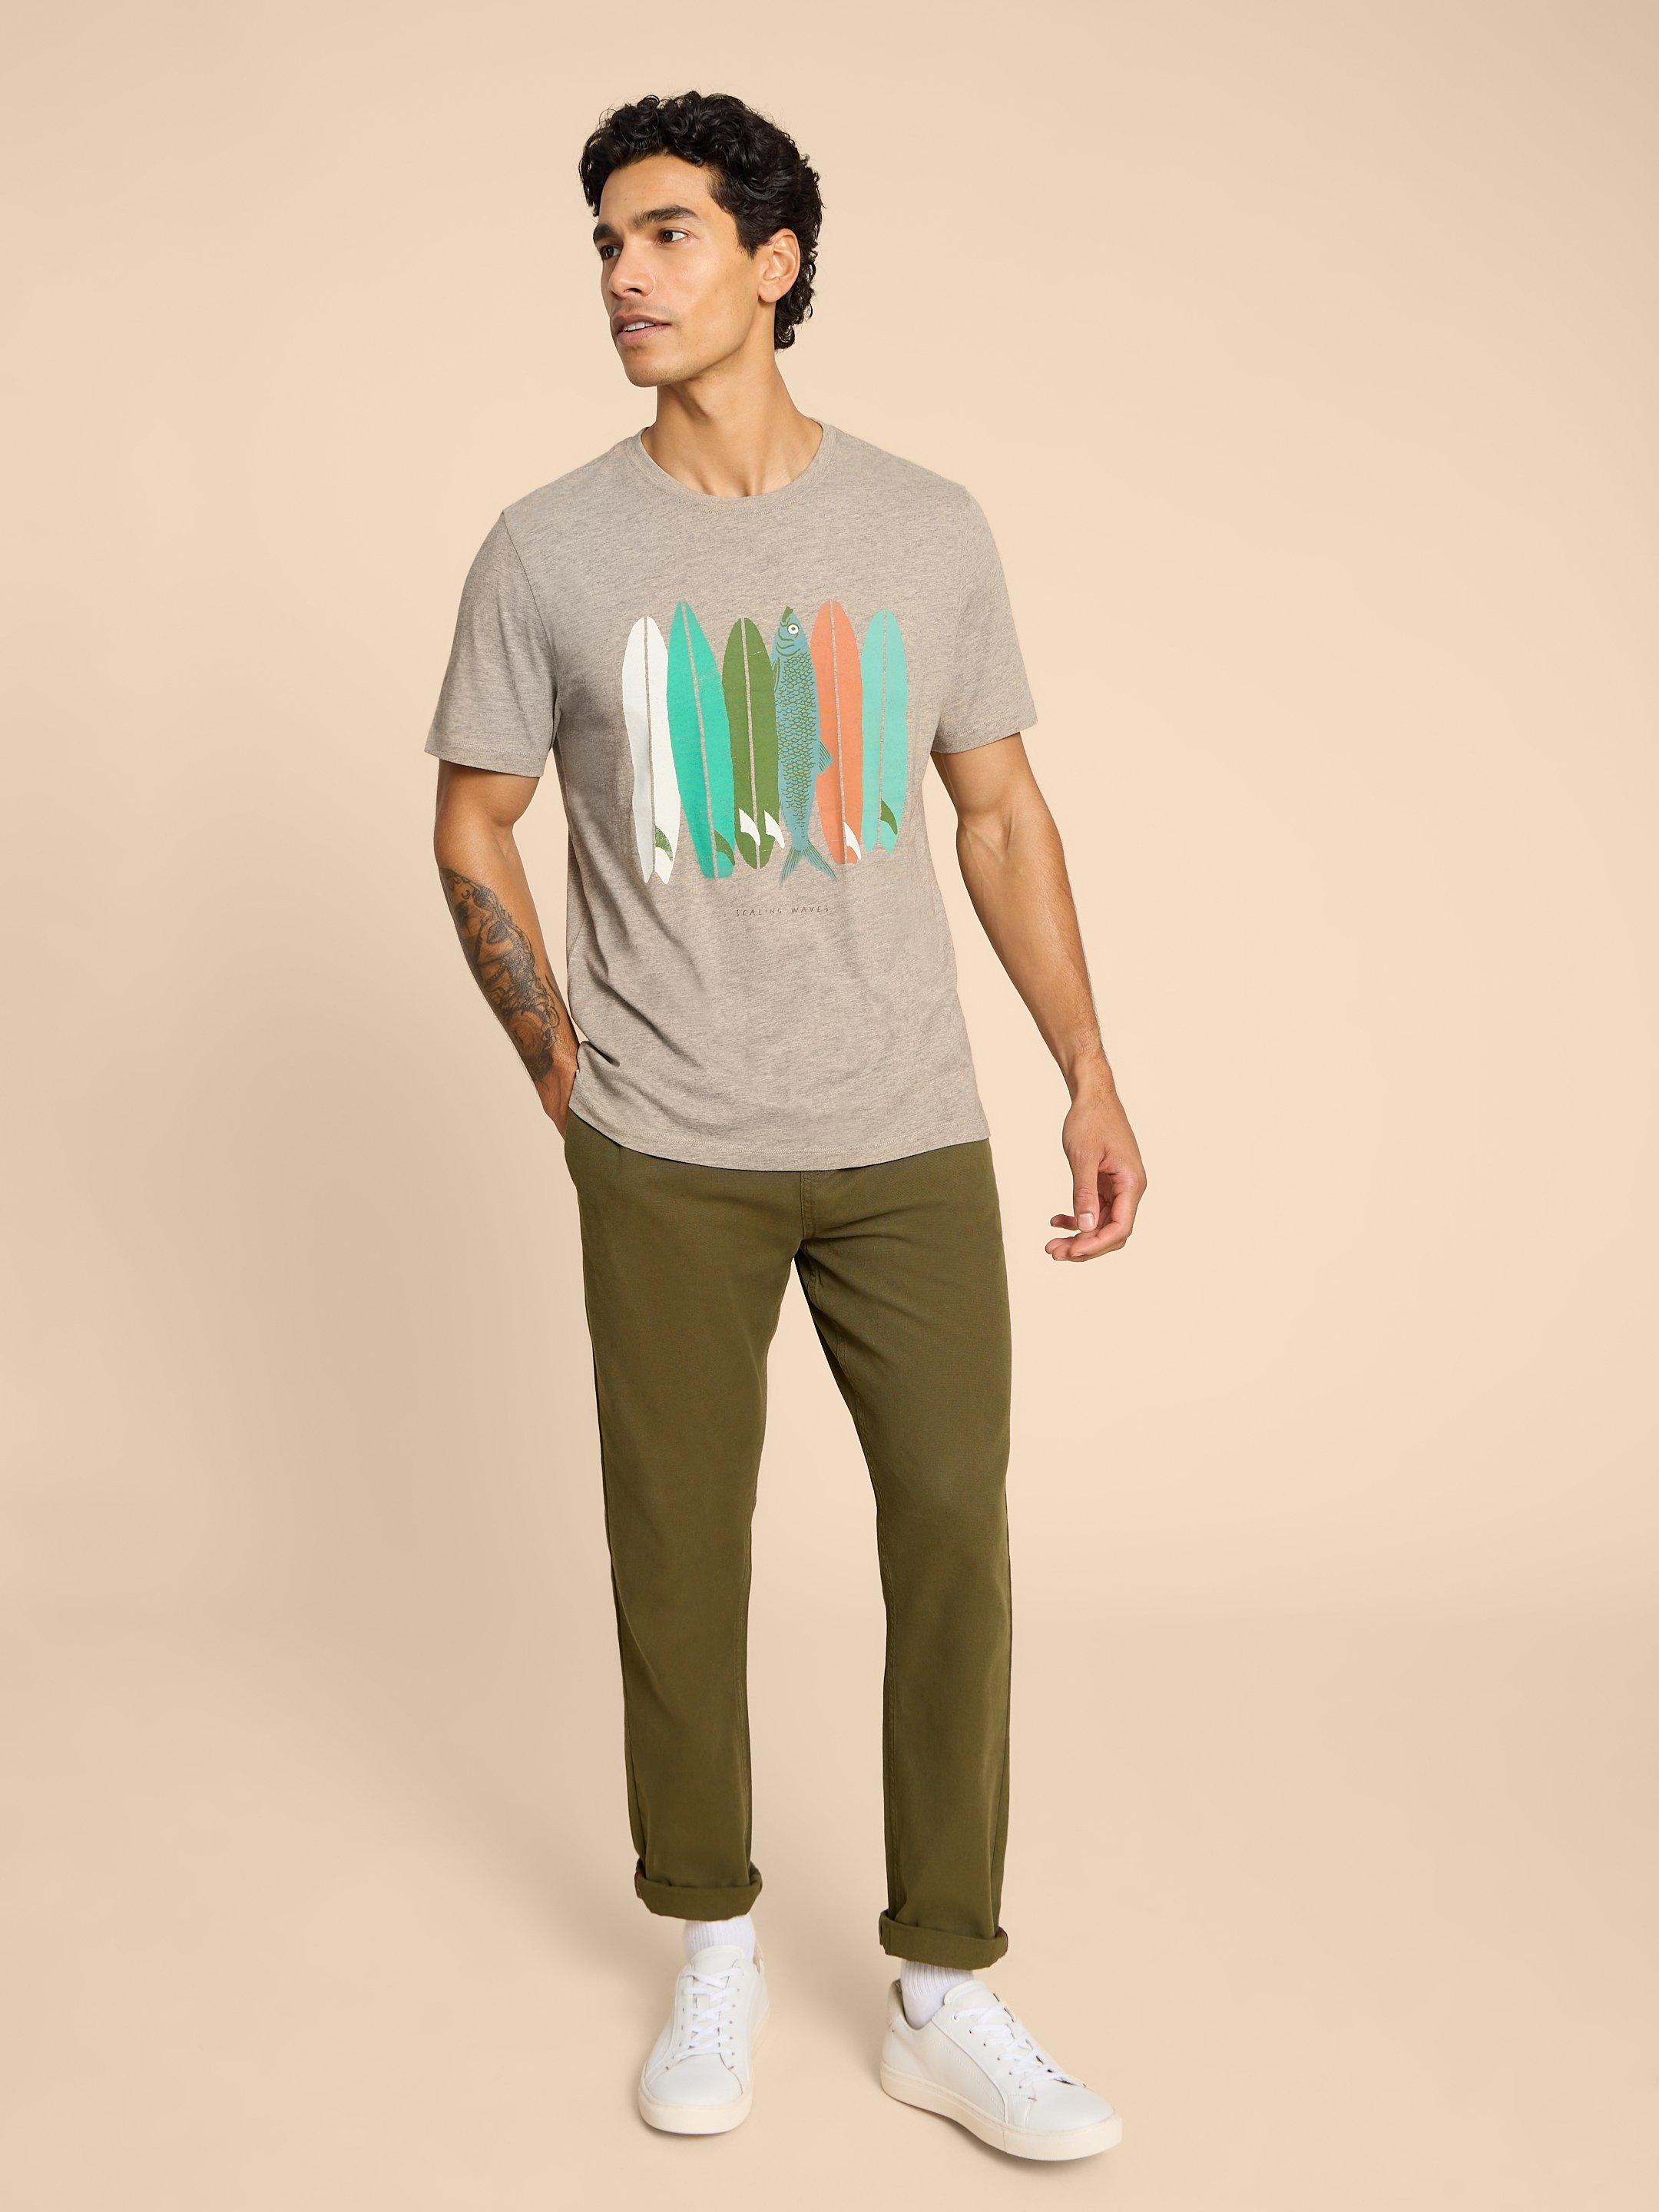 Scaling Waves Graphic Tee